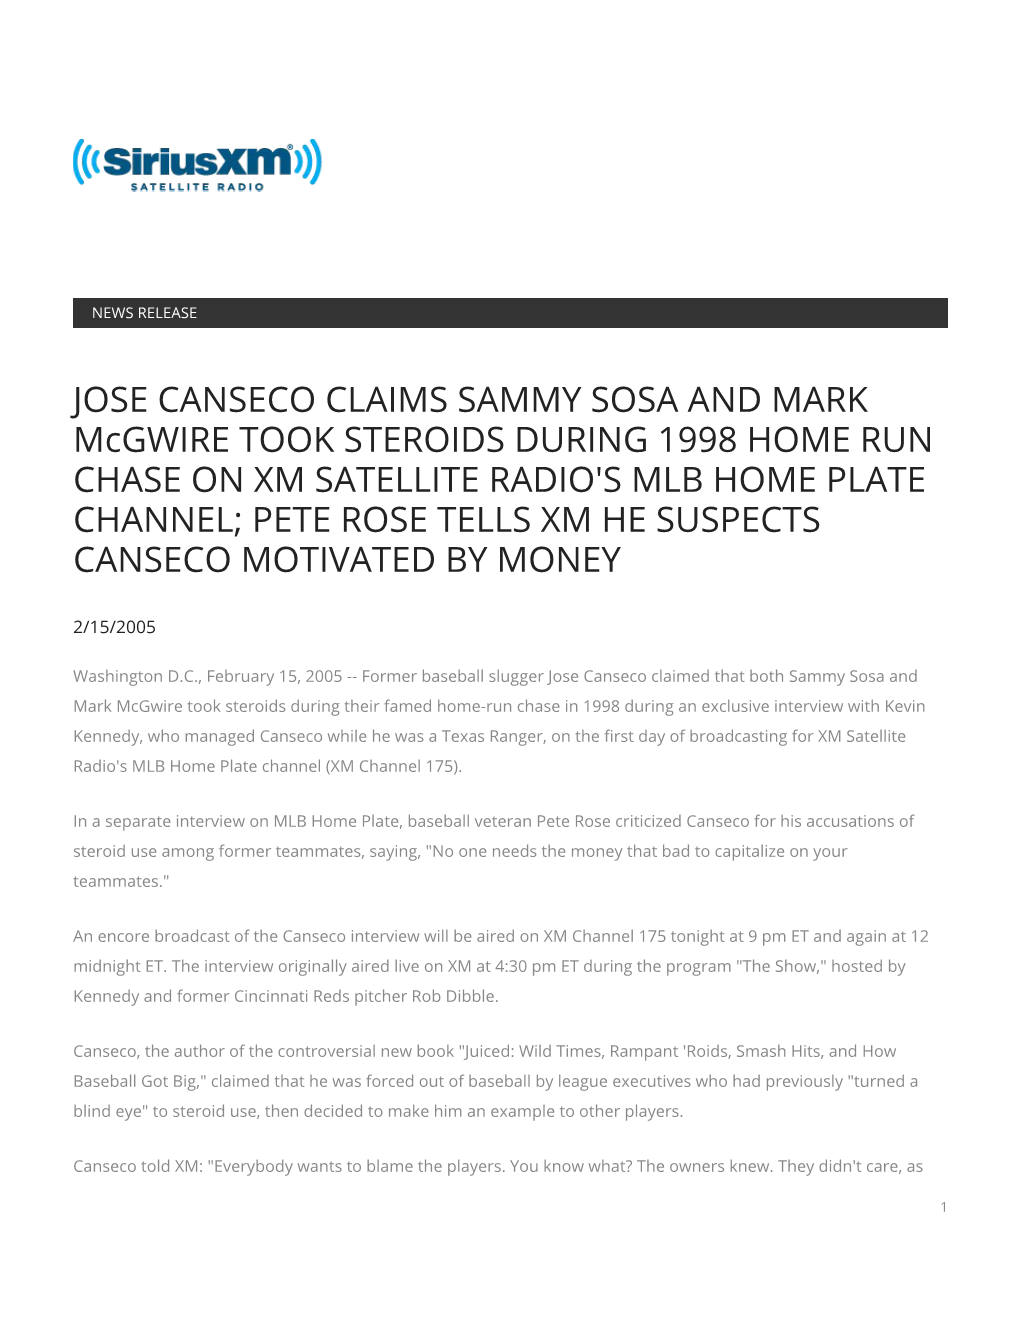 JOSE CANSECO CLAIMS SAMMY SOSA and MARK Mcgwire TOOK